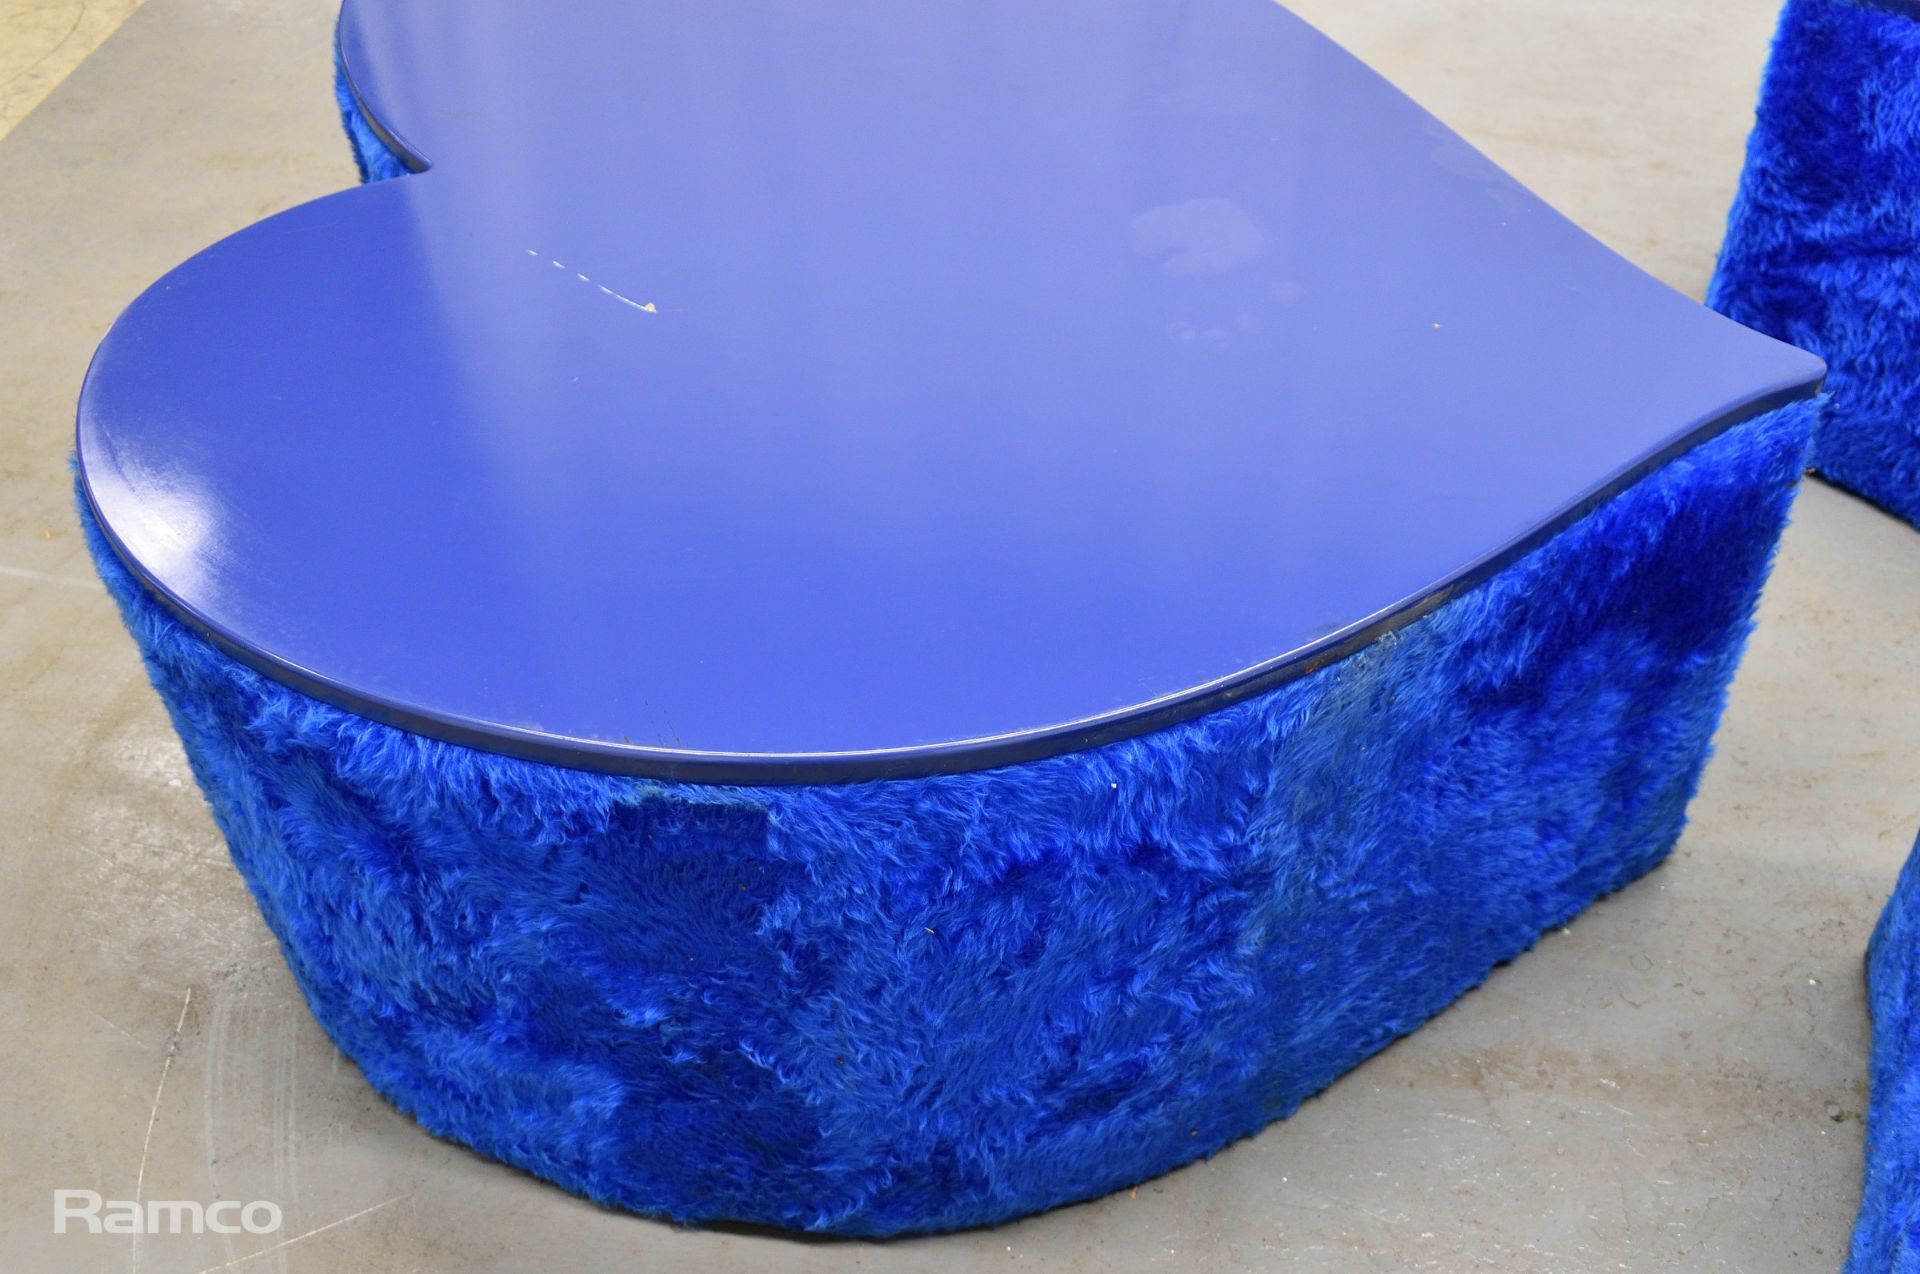 3x Asymmetrical heart shaped blue fur-covered wooden tables from countries' seating area - Image 6 of 14